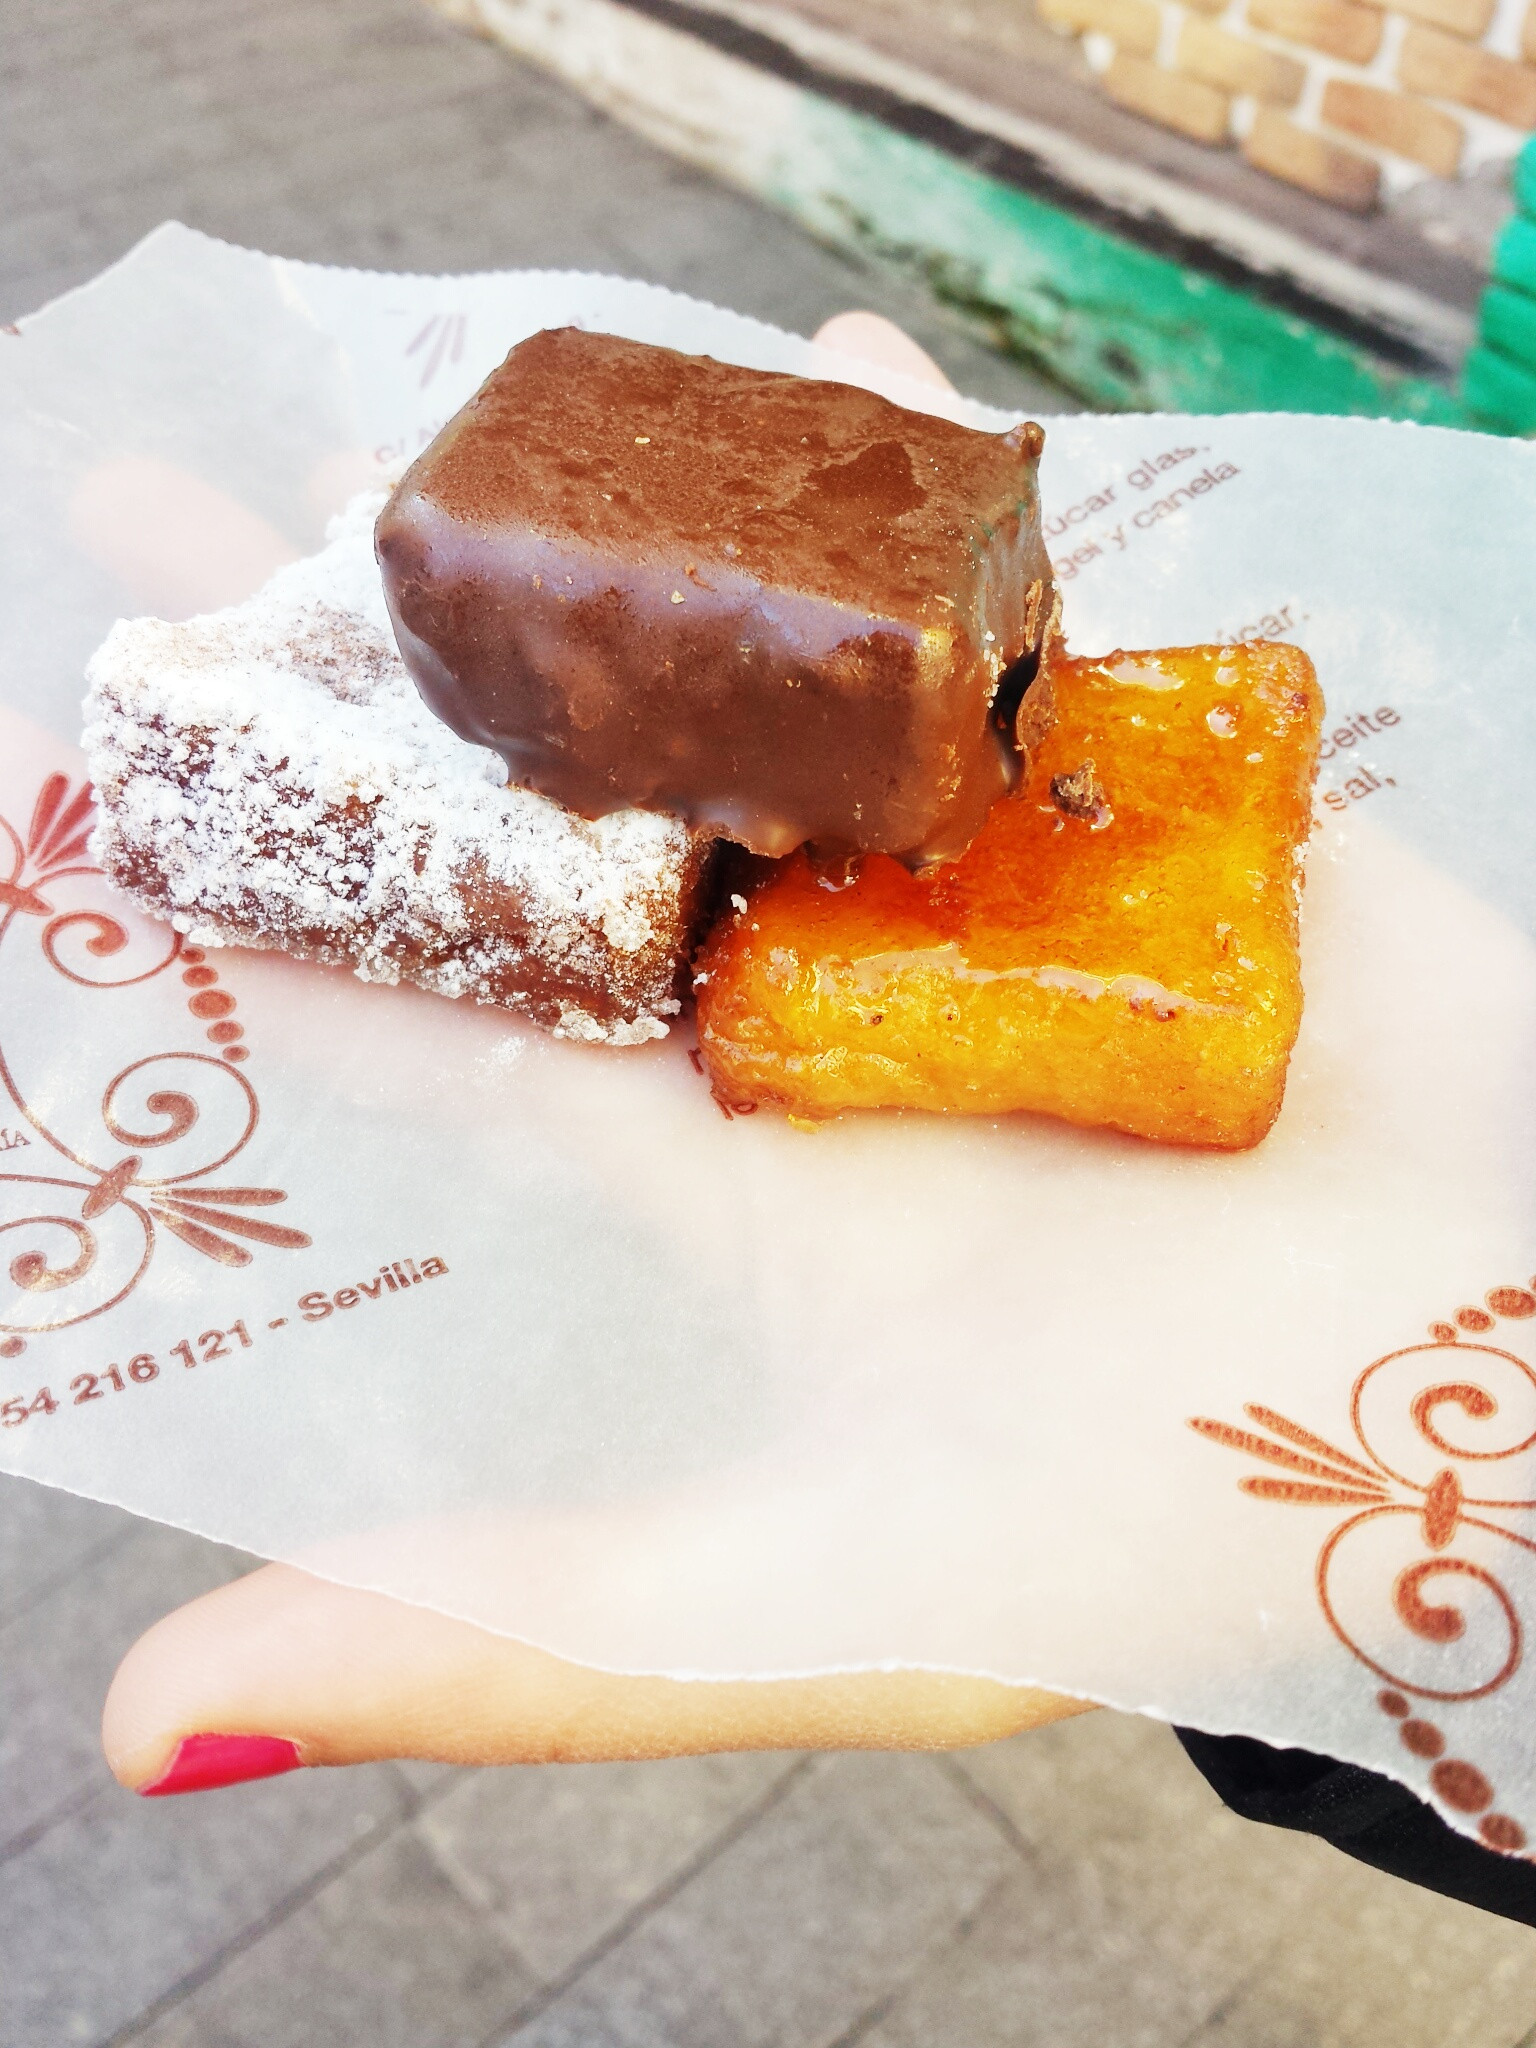 Desserts From Spain
 7 Incredibly Delicious Spanish Desserts An Insider s